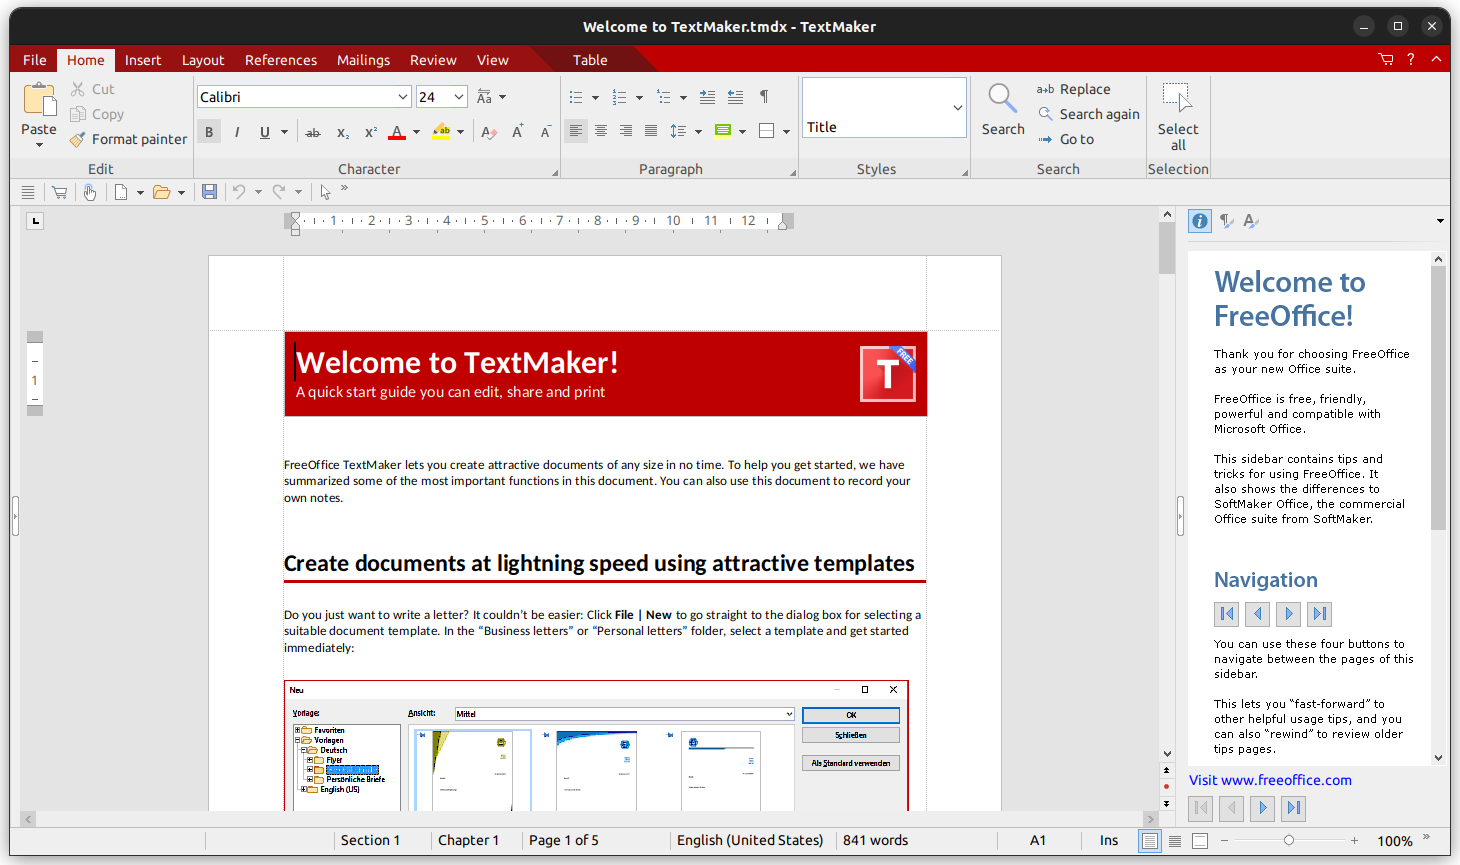 FreeOffice TextMaker:  A Saple document is opened along with a display of many tools and icons available in the interface